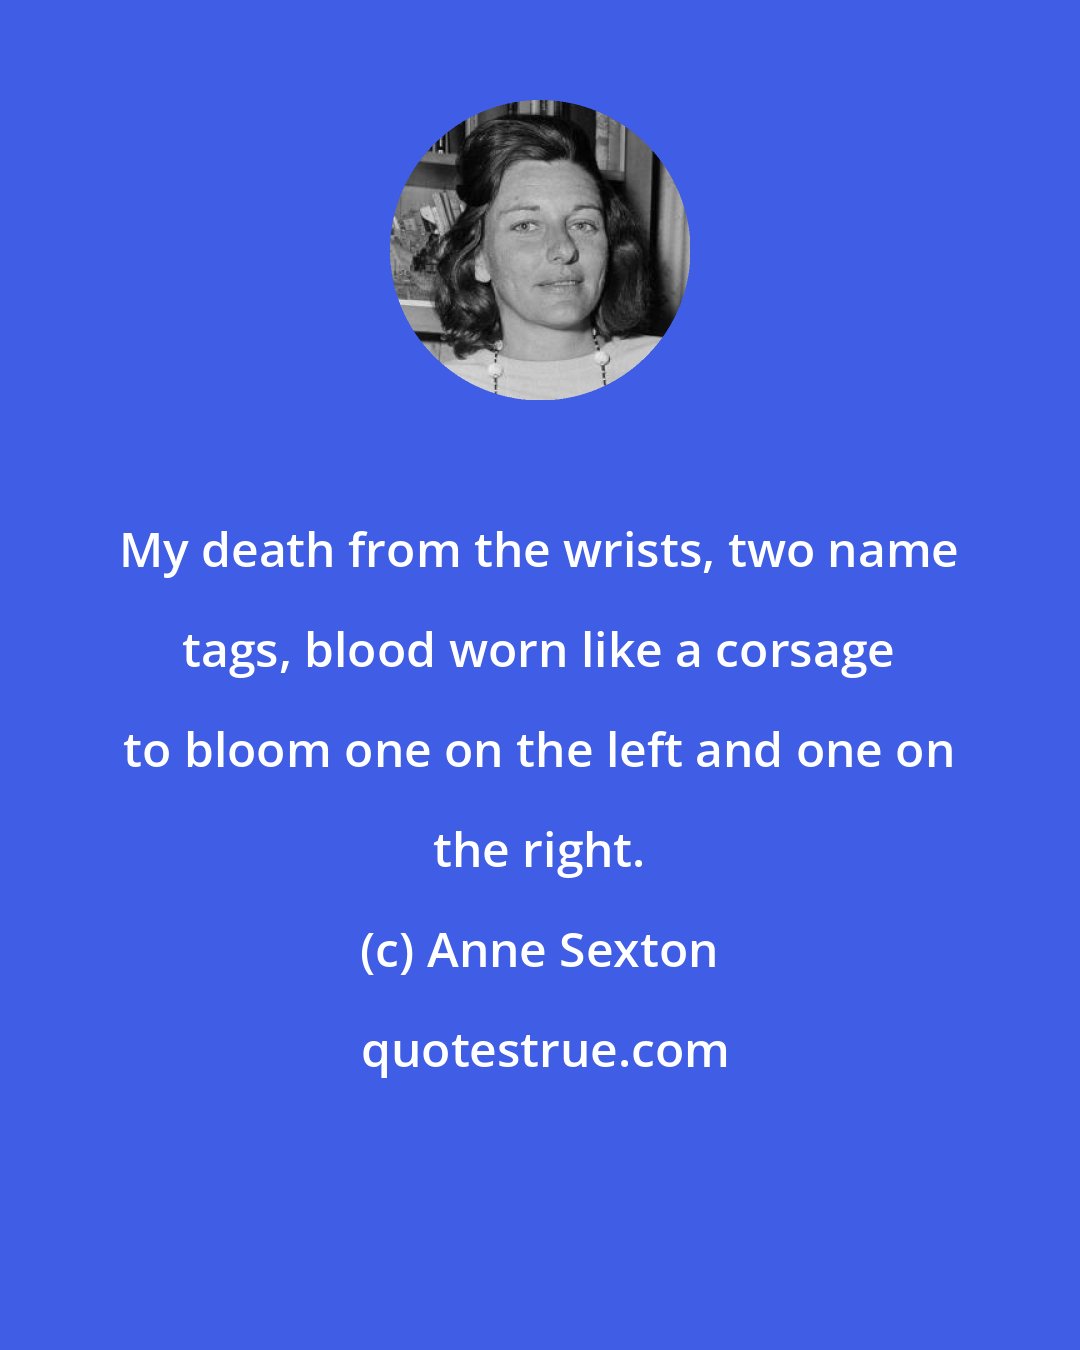 Anne Sexton: My death from the wrists, two name tags, blood worn like a corsage to bloom one on the left and one on the right.